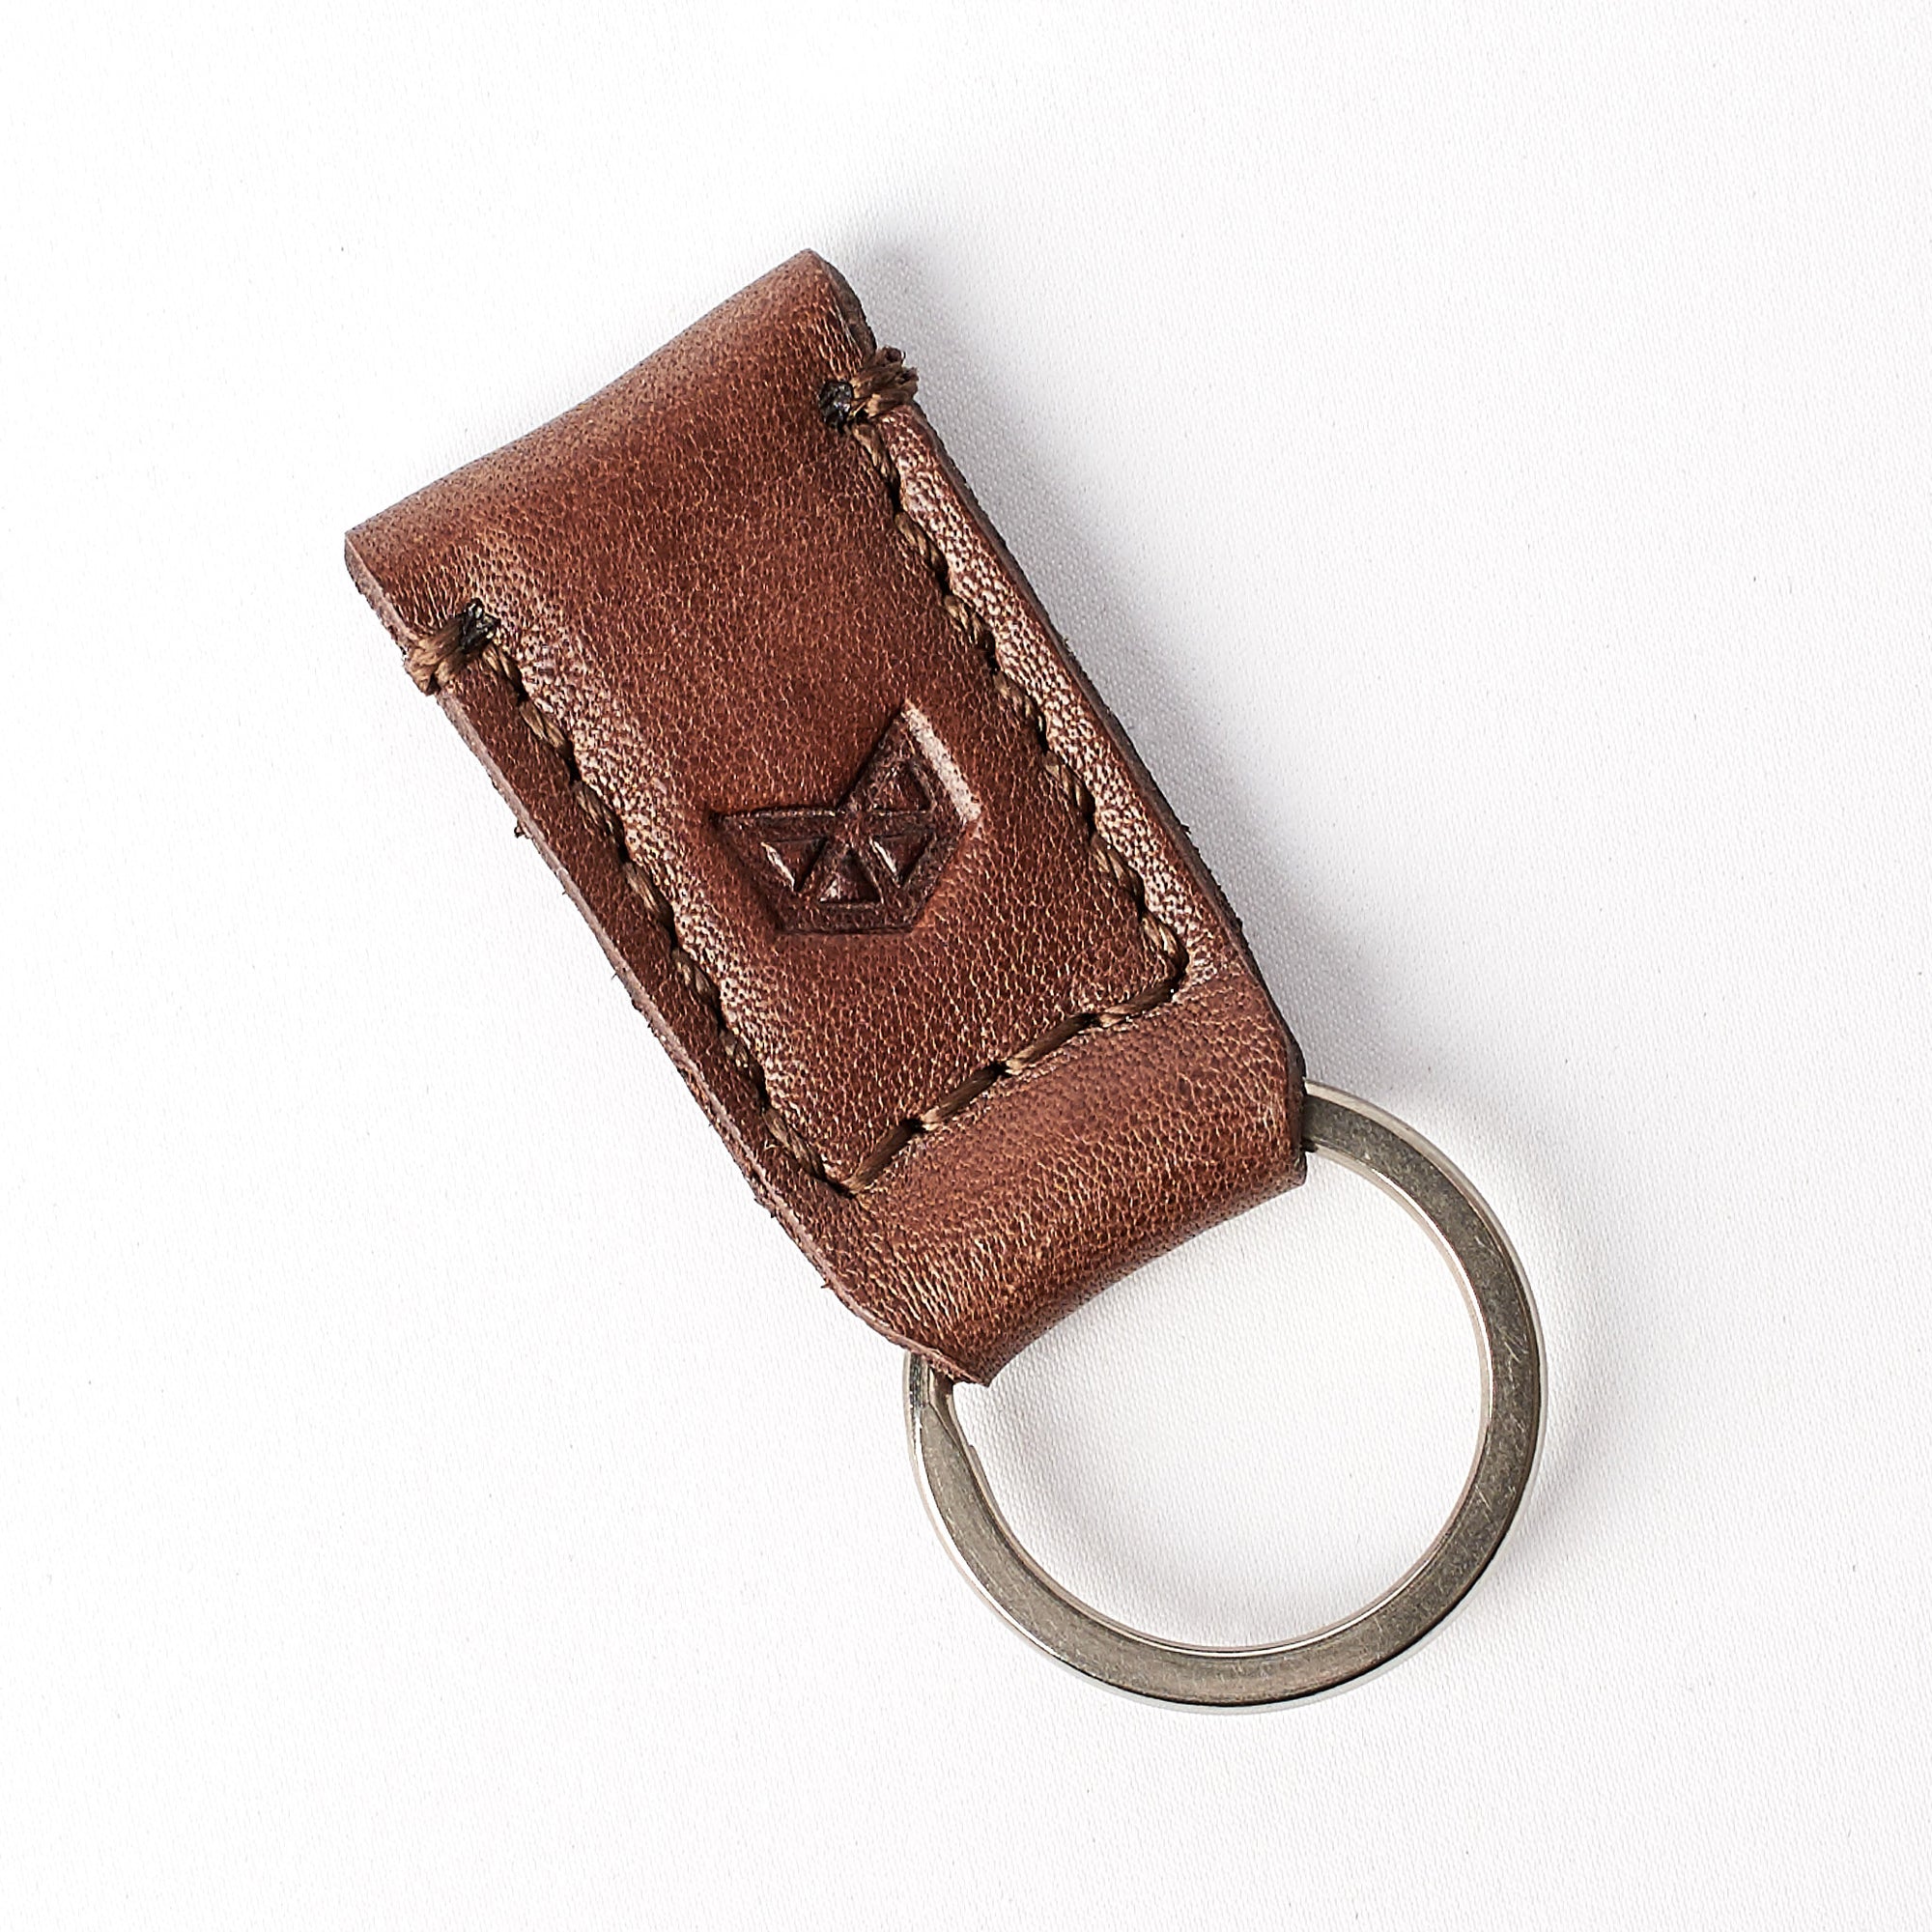 Small brown leather magnetic keychain for mens gifts